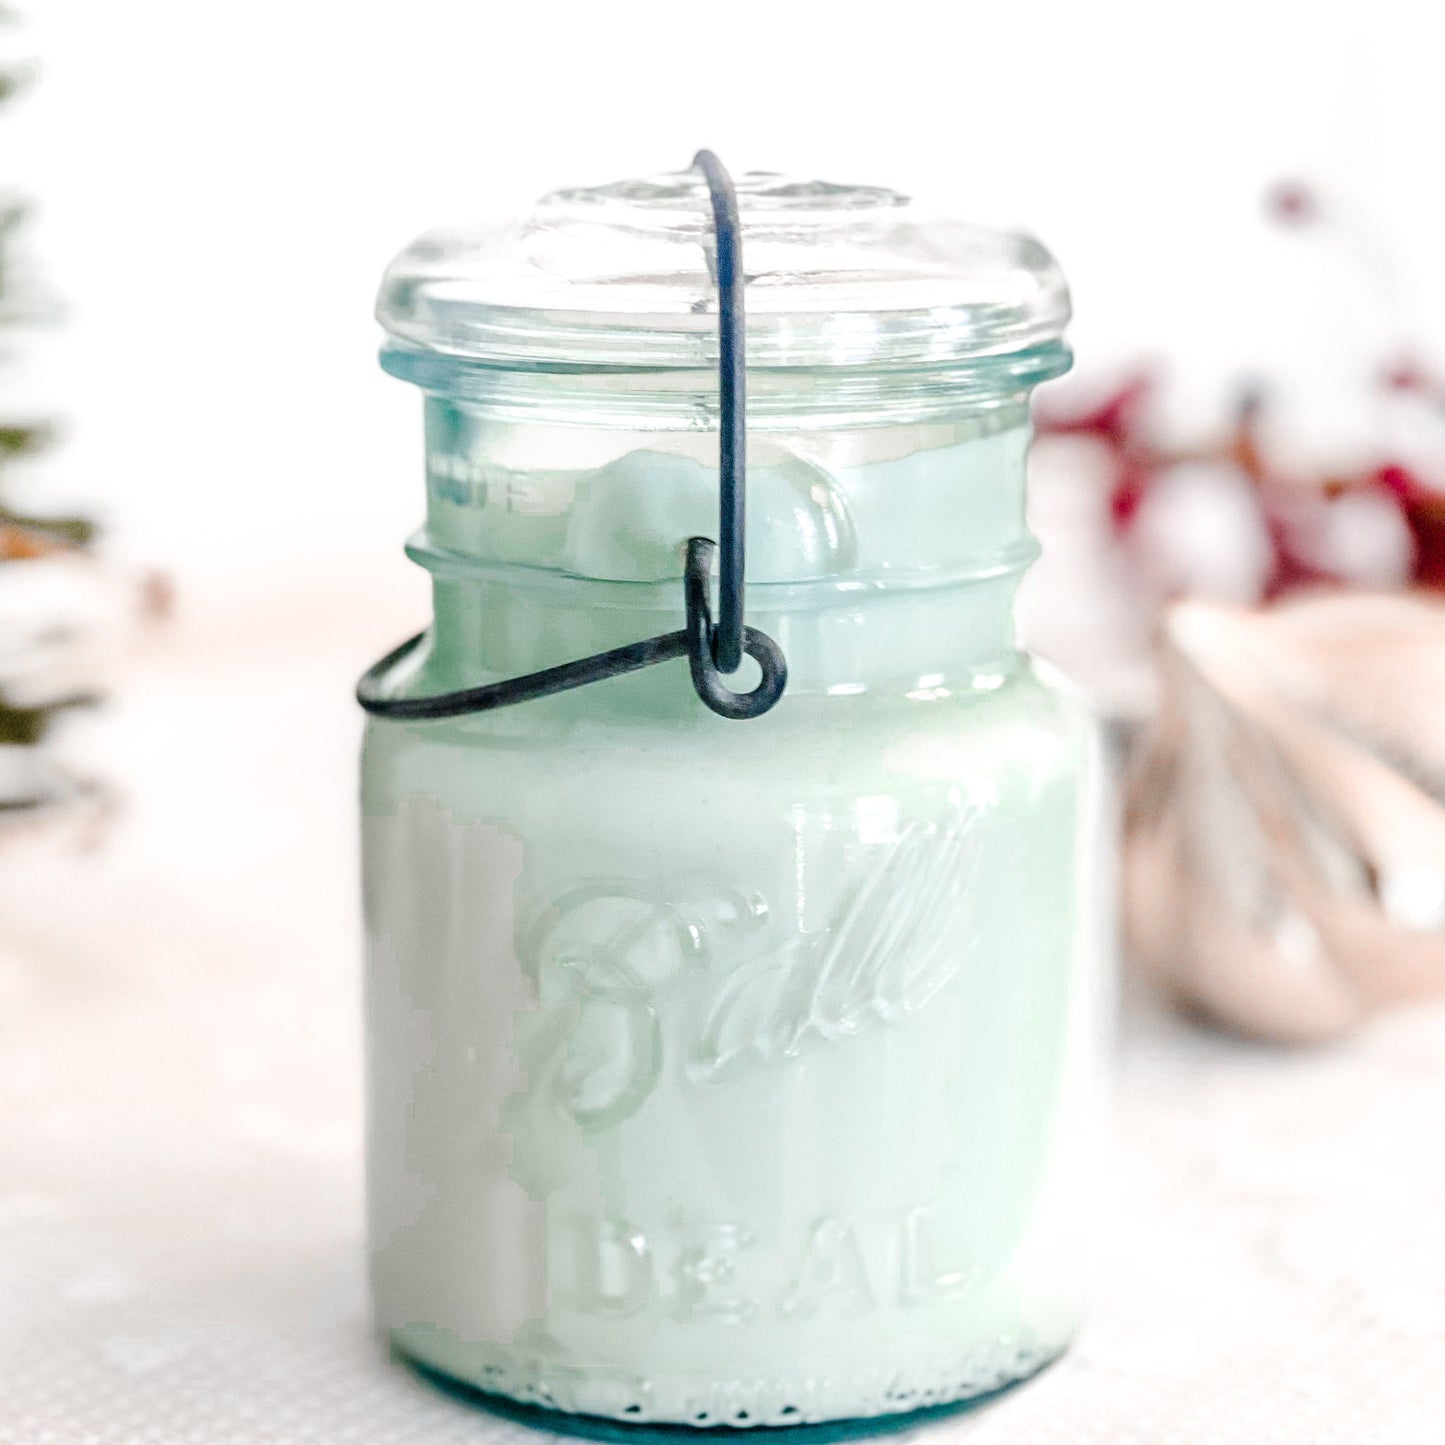 Holiday Candles, Vintage, Jar Candle, Best Friend Gifts, Farmhouse Decor